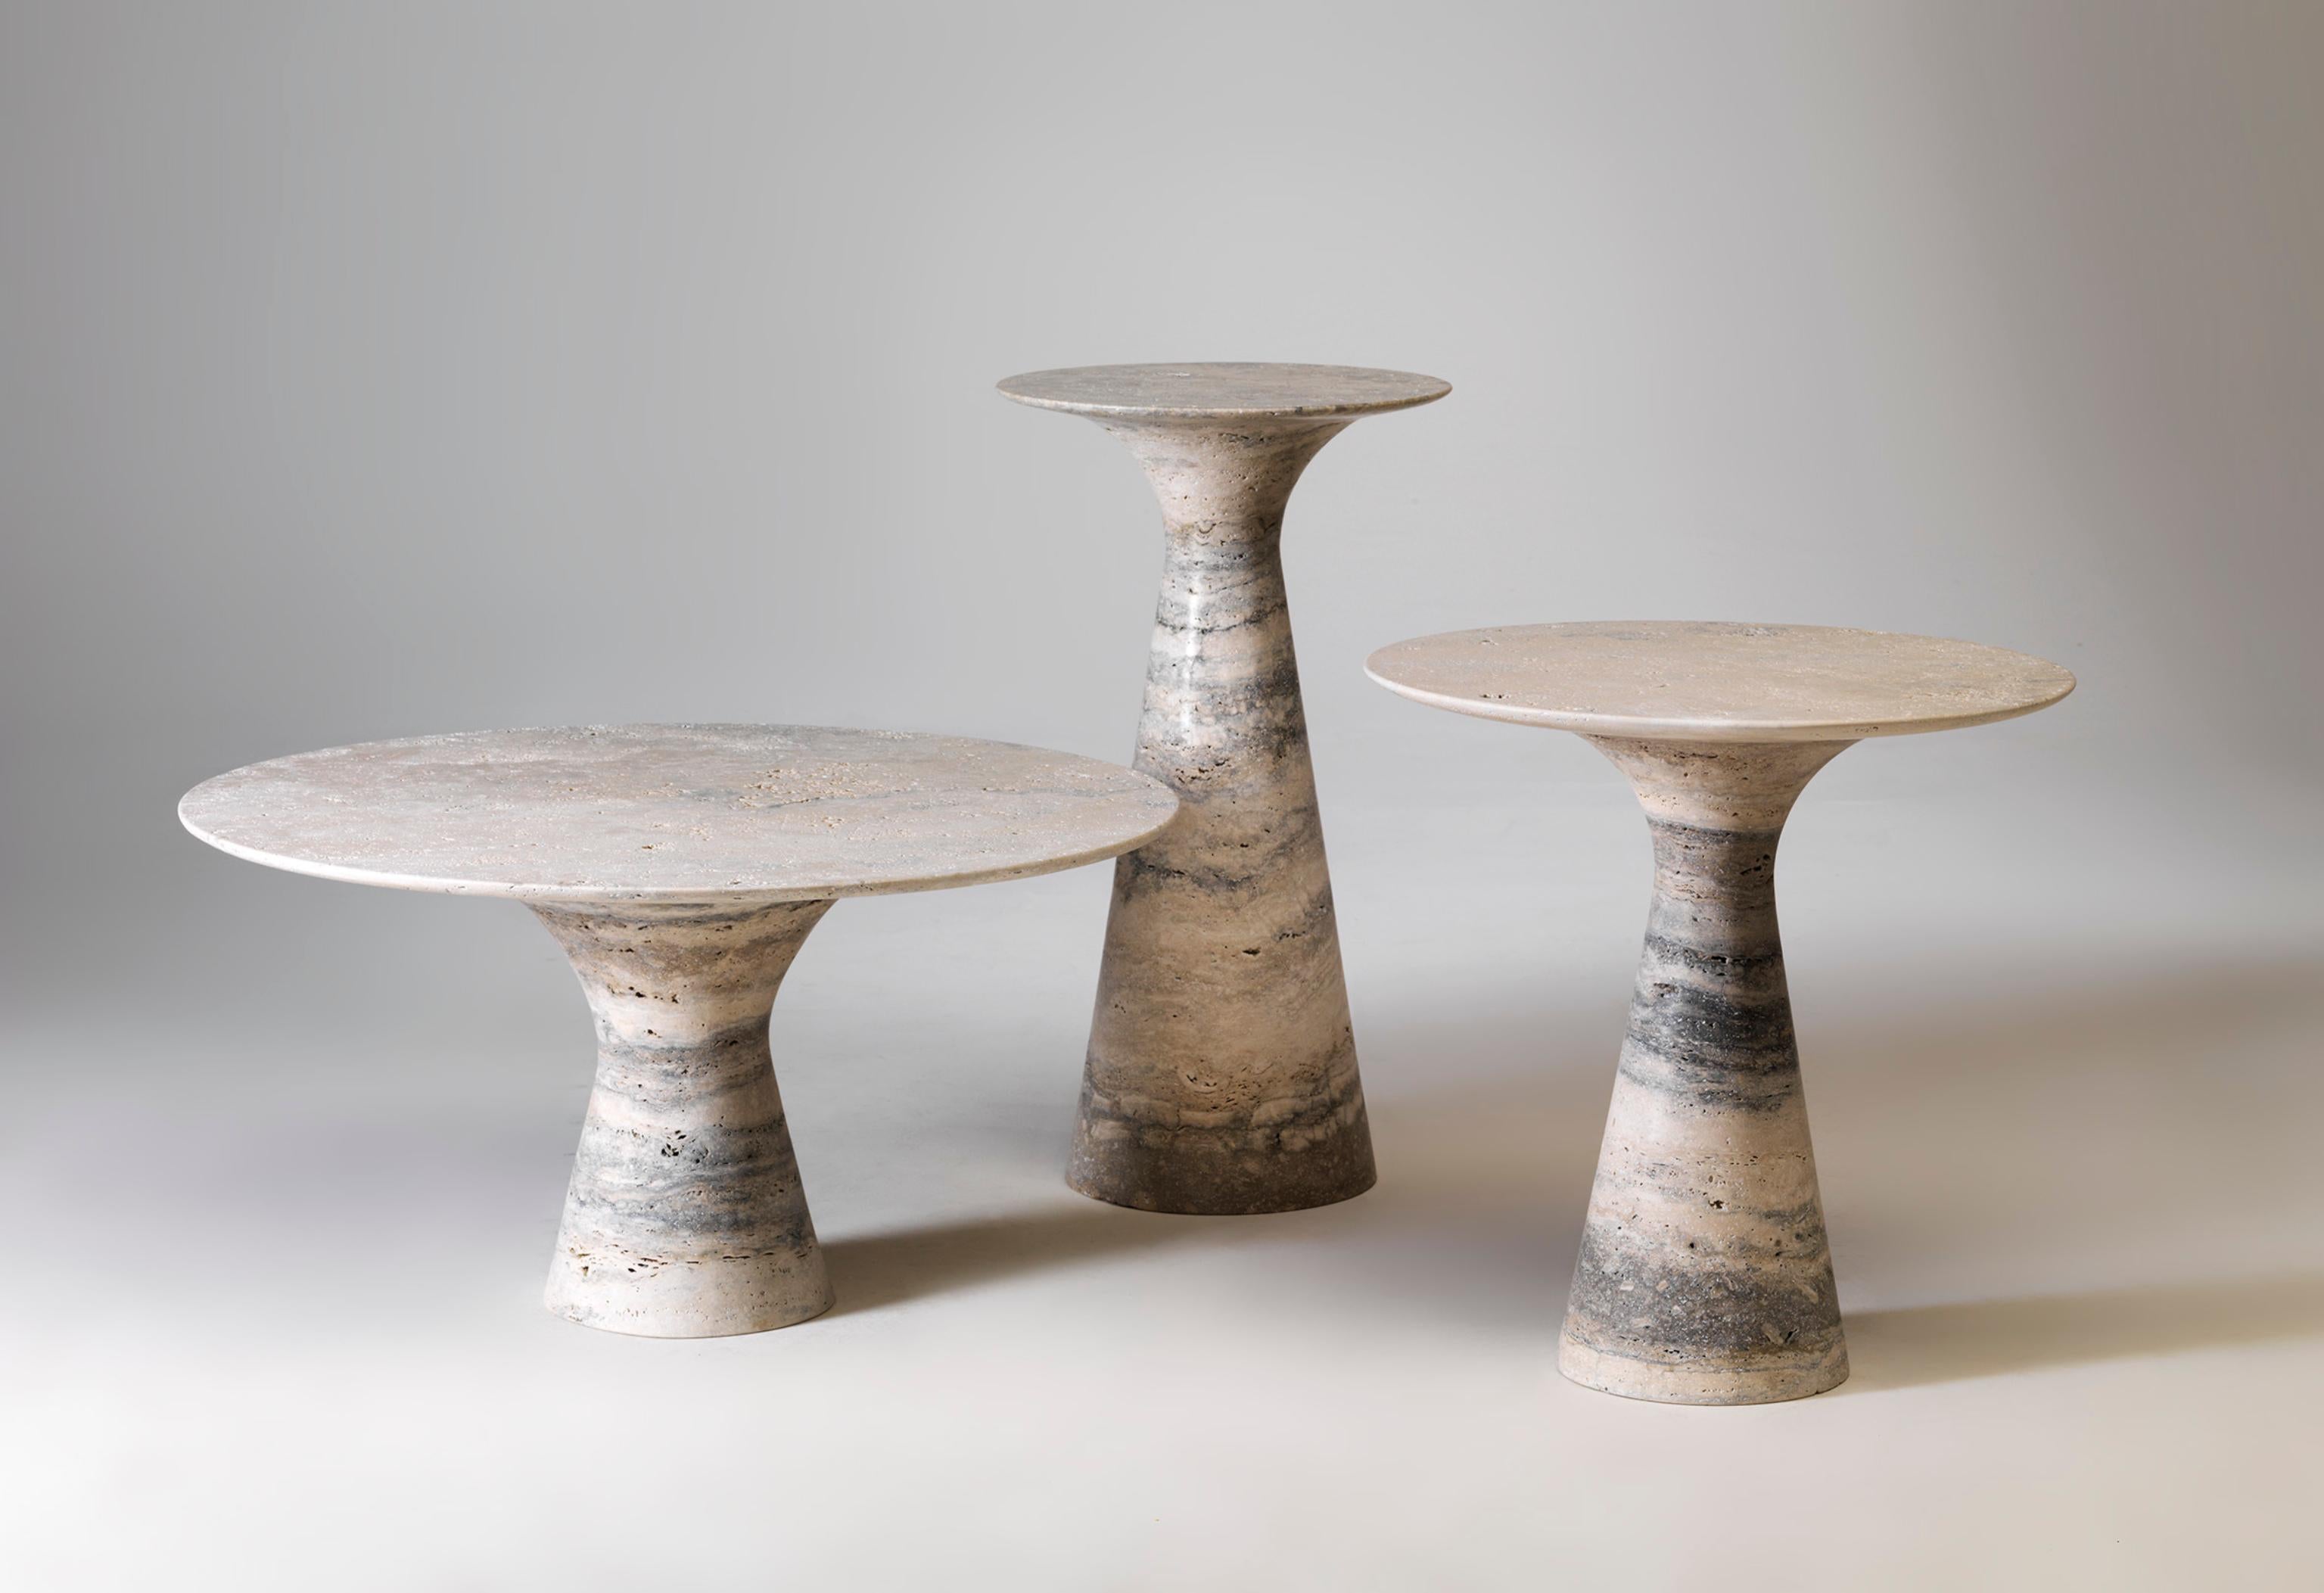 Refined Set of 2 Travertino silver contemporary marble side tables
Measures: Tall 62 x 45 x 45 cm
Short 36 x 80 x 80 cm

Angelo is the essence of a round table in natural stone, a sculptural shape in robust material with elegant lines and